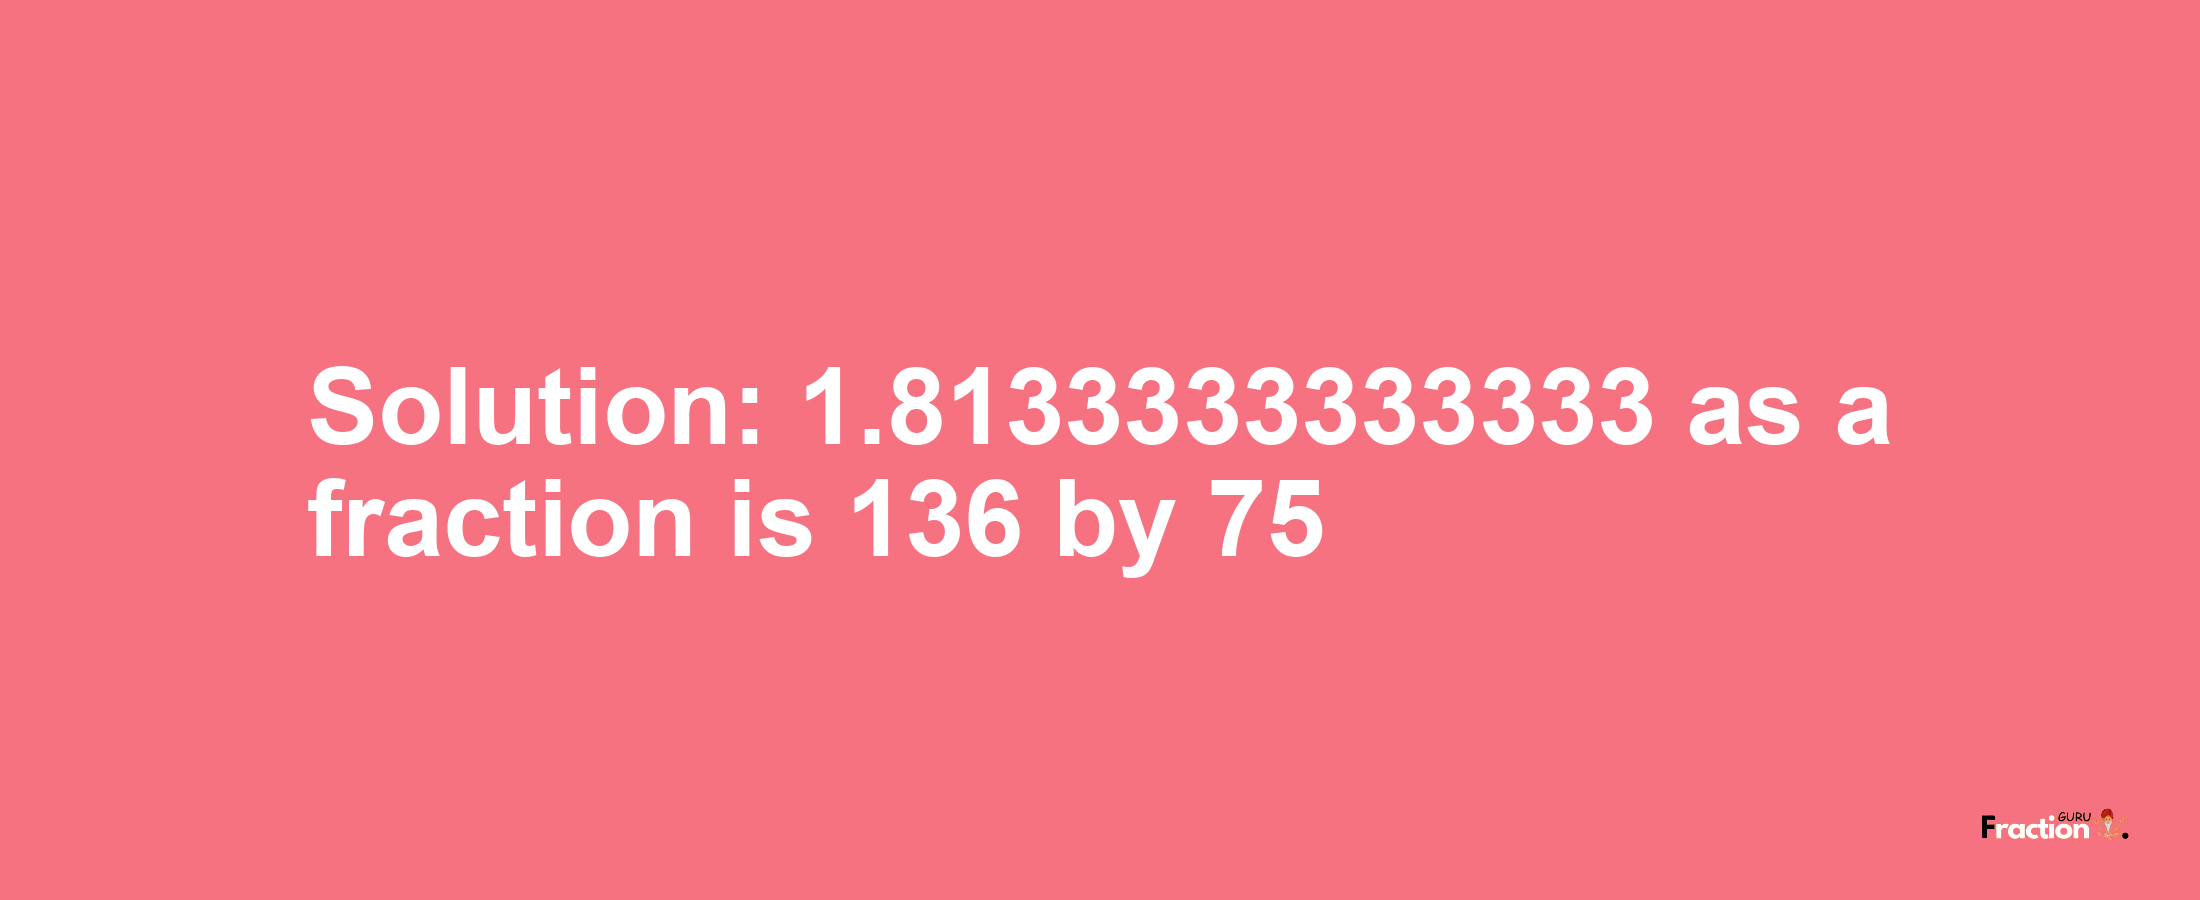 Solution:1.8133333333333 as a fraction is 136/75